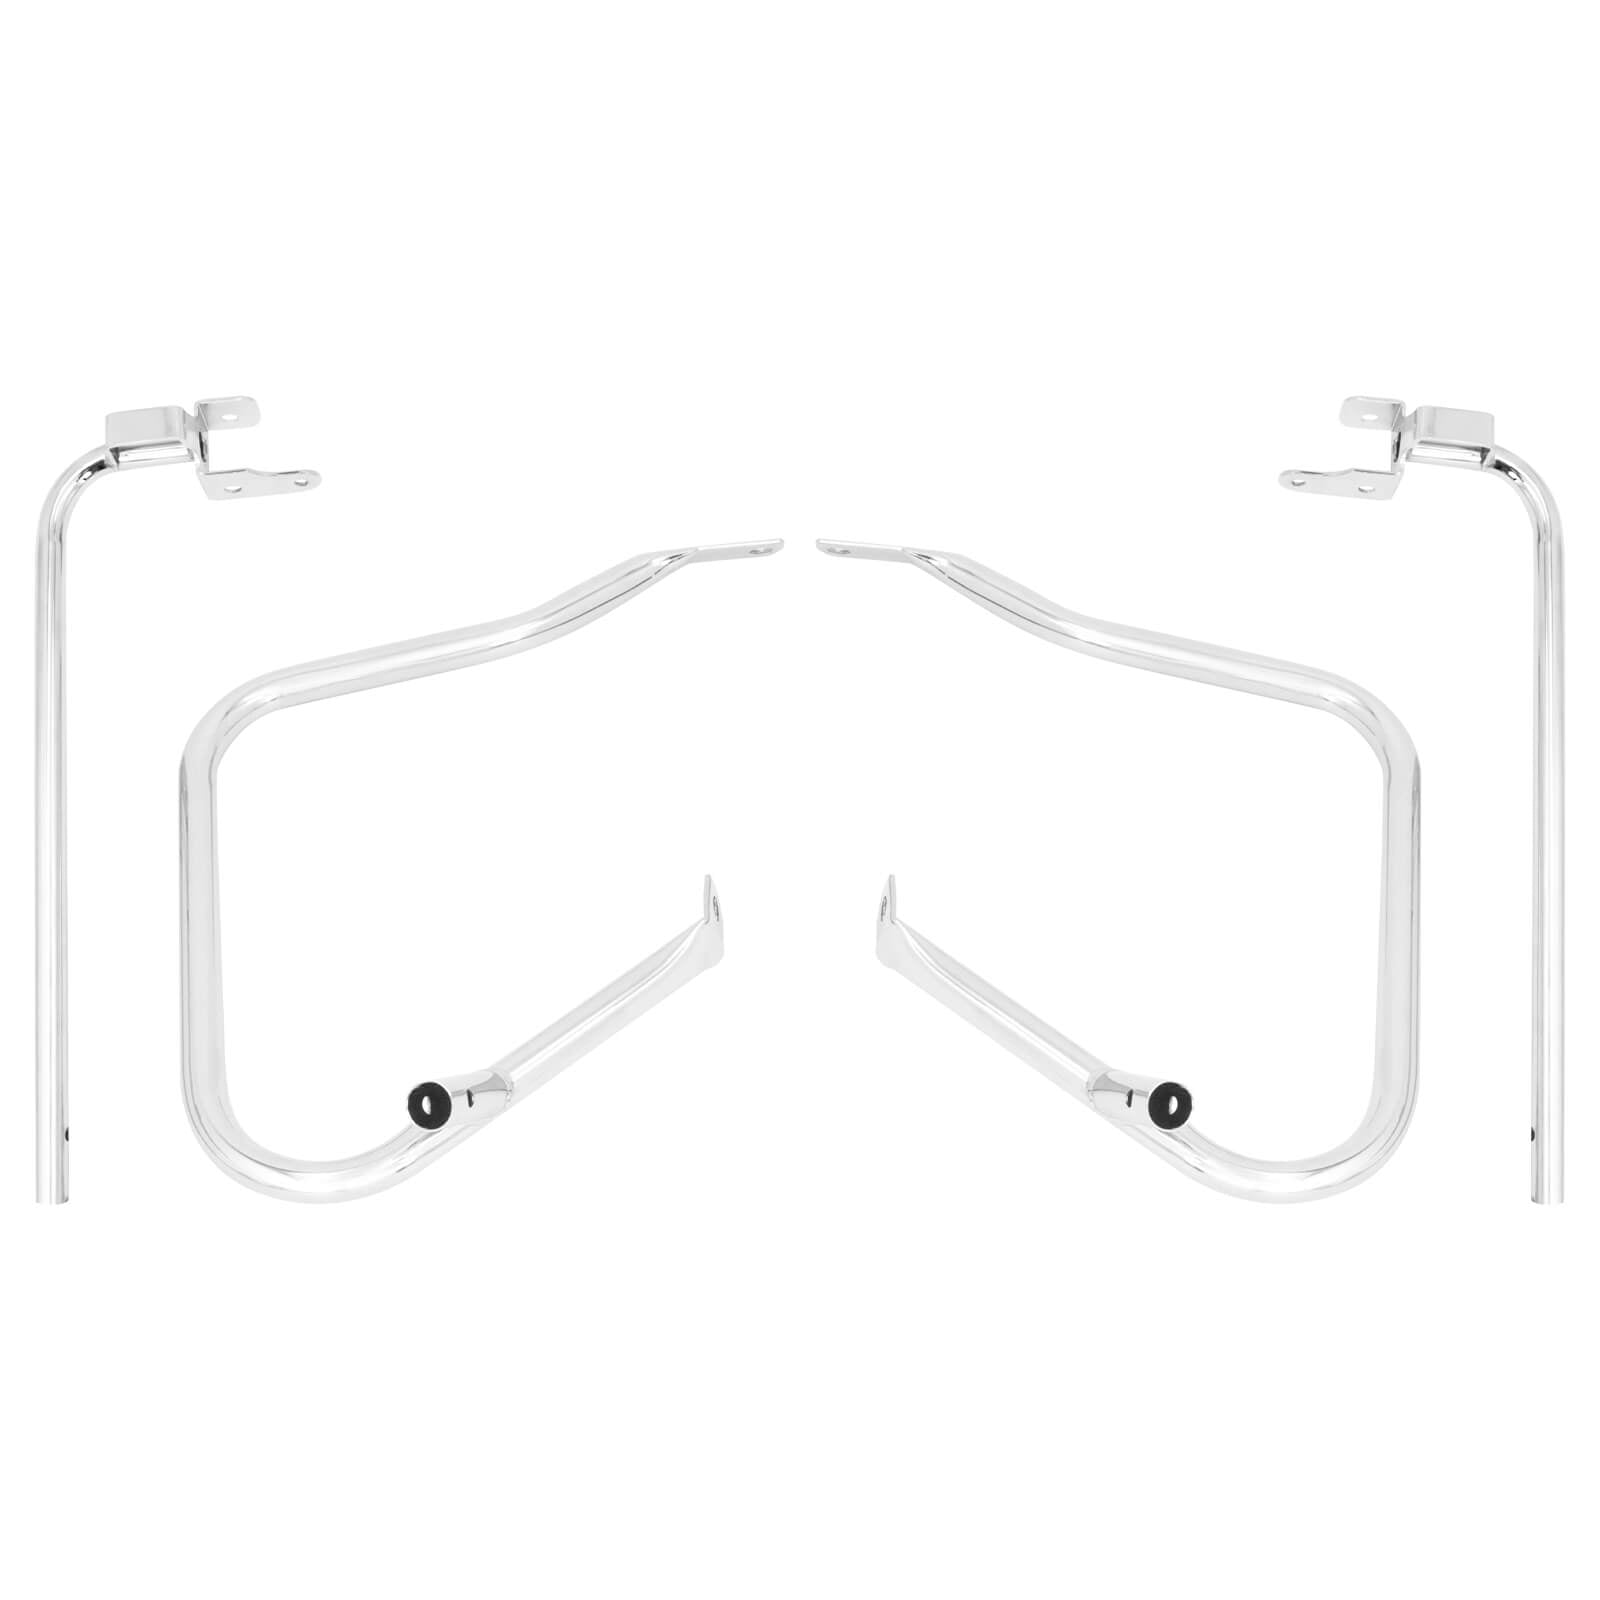 Mactions aftermarket saddlebag guards bars protect for touring 2014-up CR018105